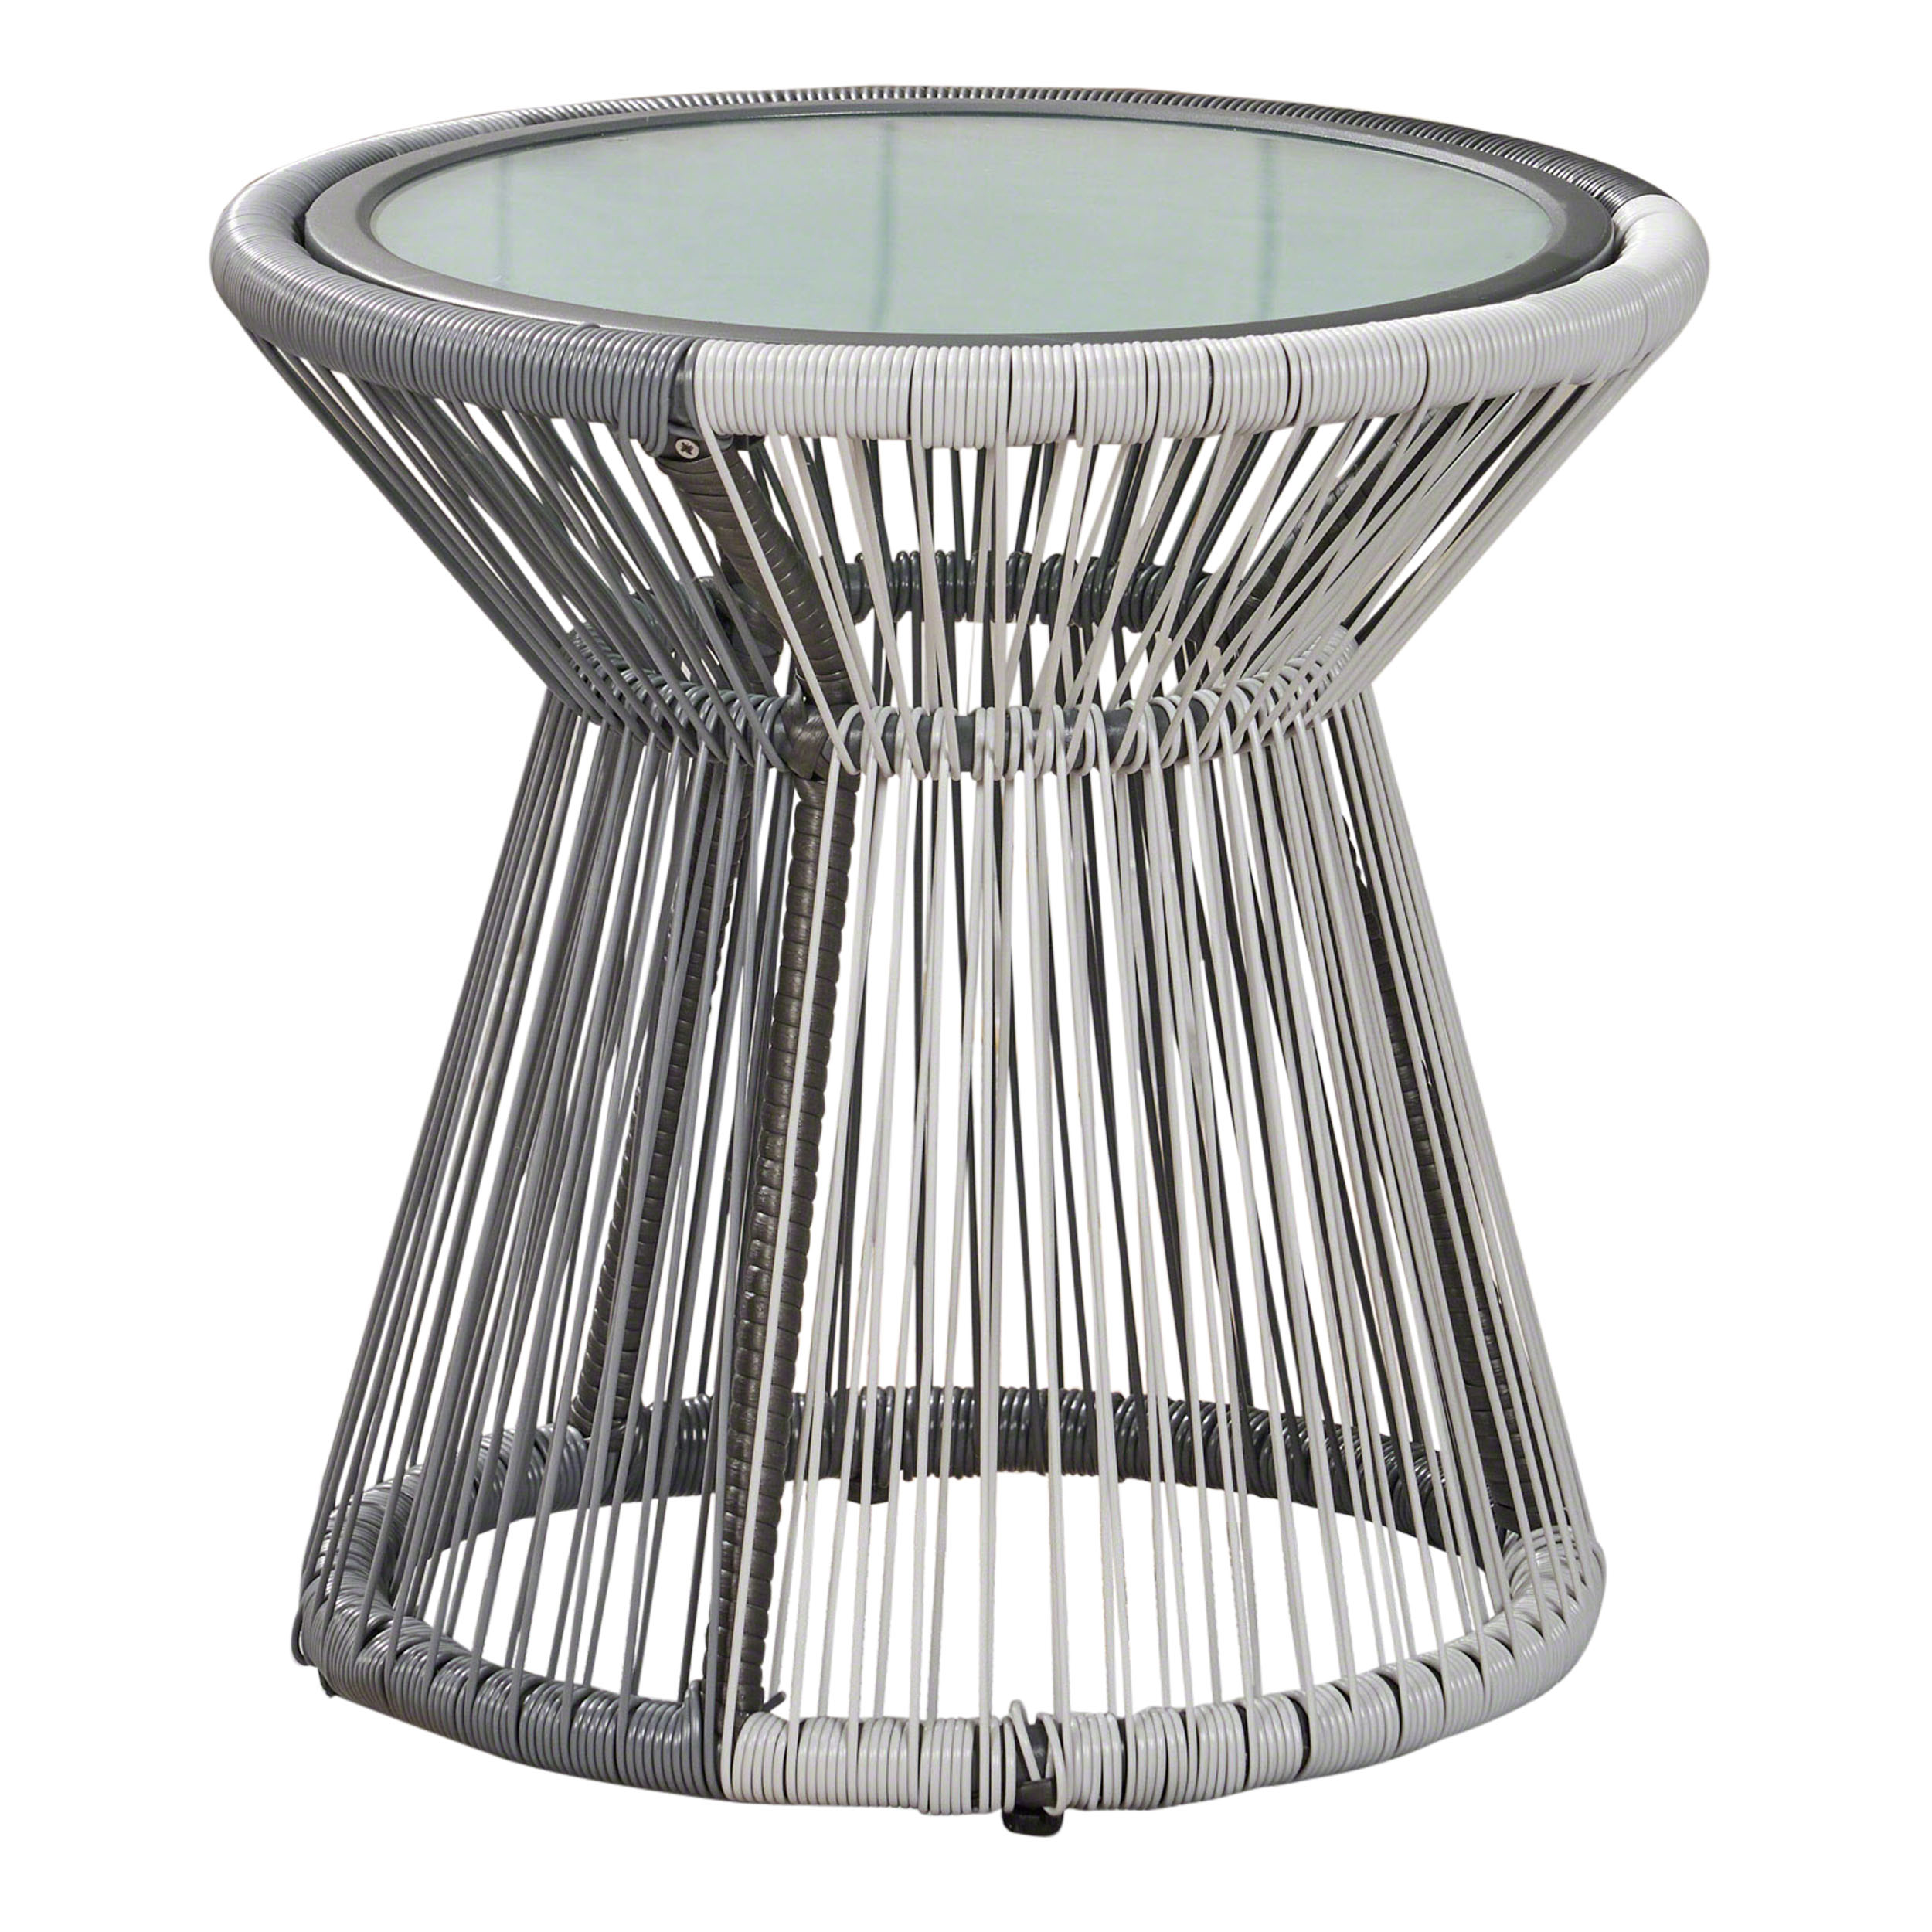 GDF Studio Aiden Outdoor Wicker Side Table with Glass Top, Gray and White - image 5 of 5